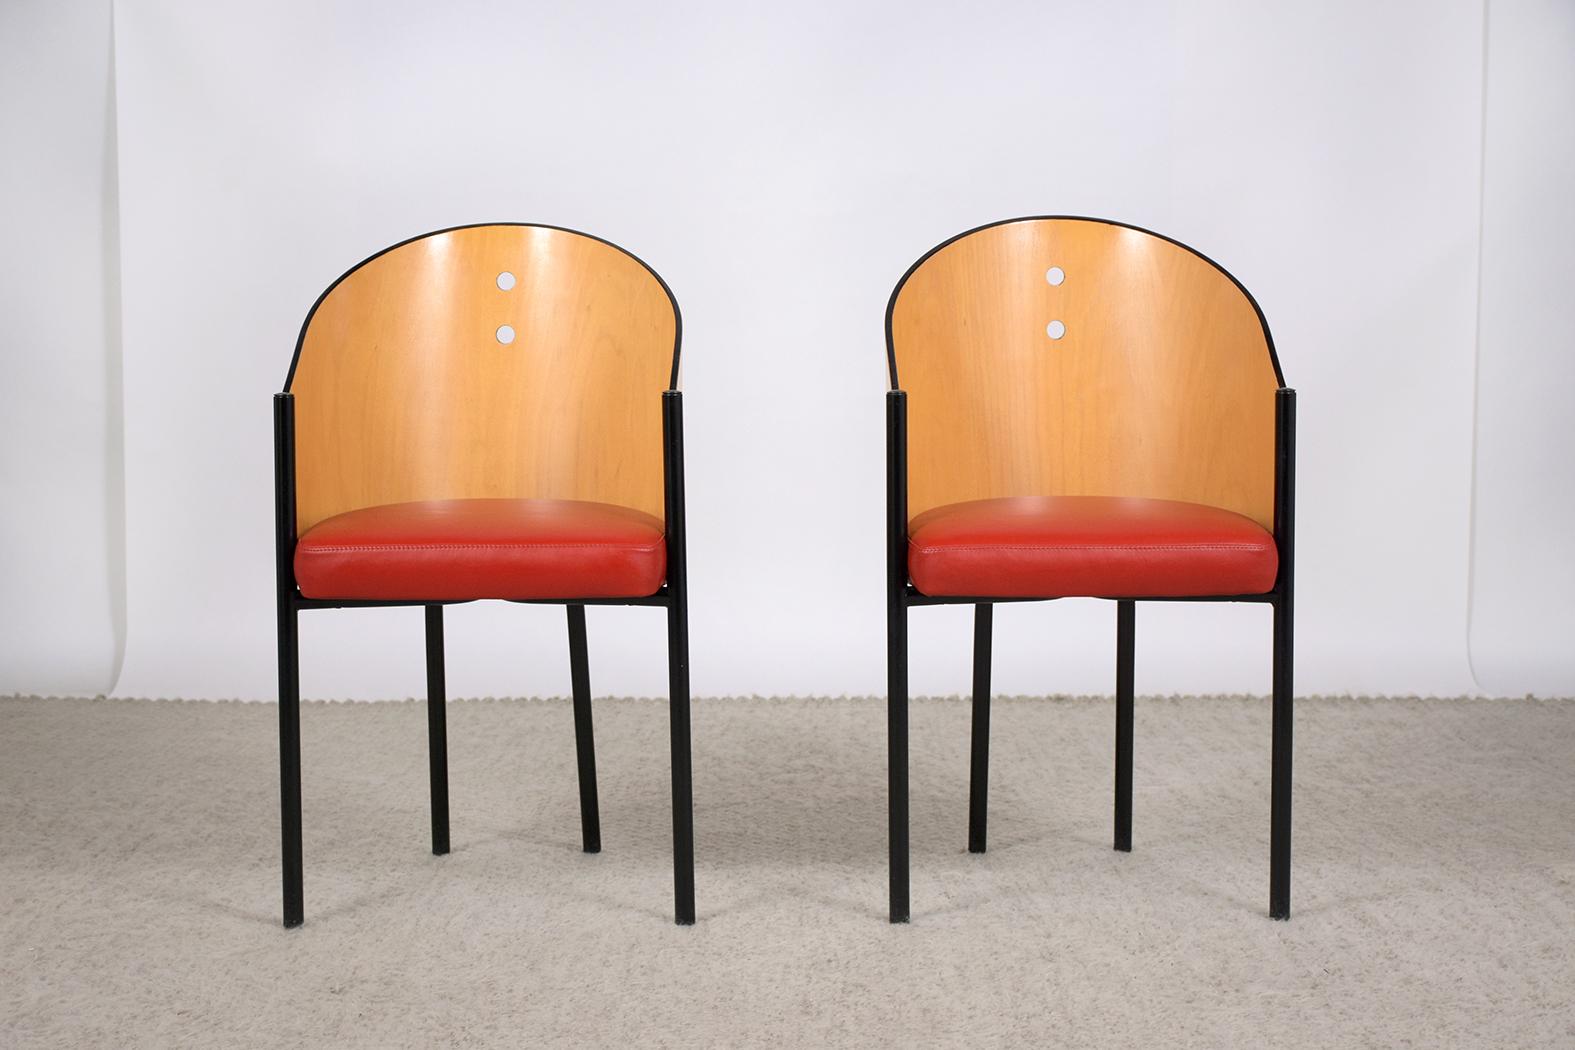 American Vintage Mid-Century Dining Chairs: Elegance in Barrel Back Design For Sale